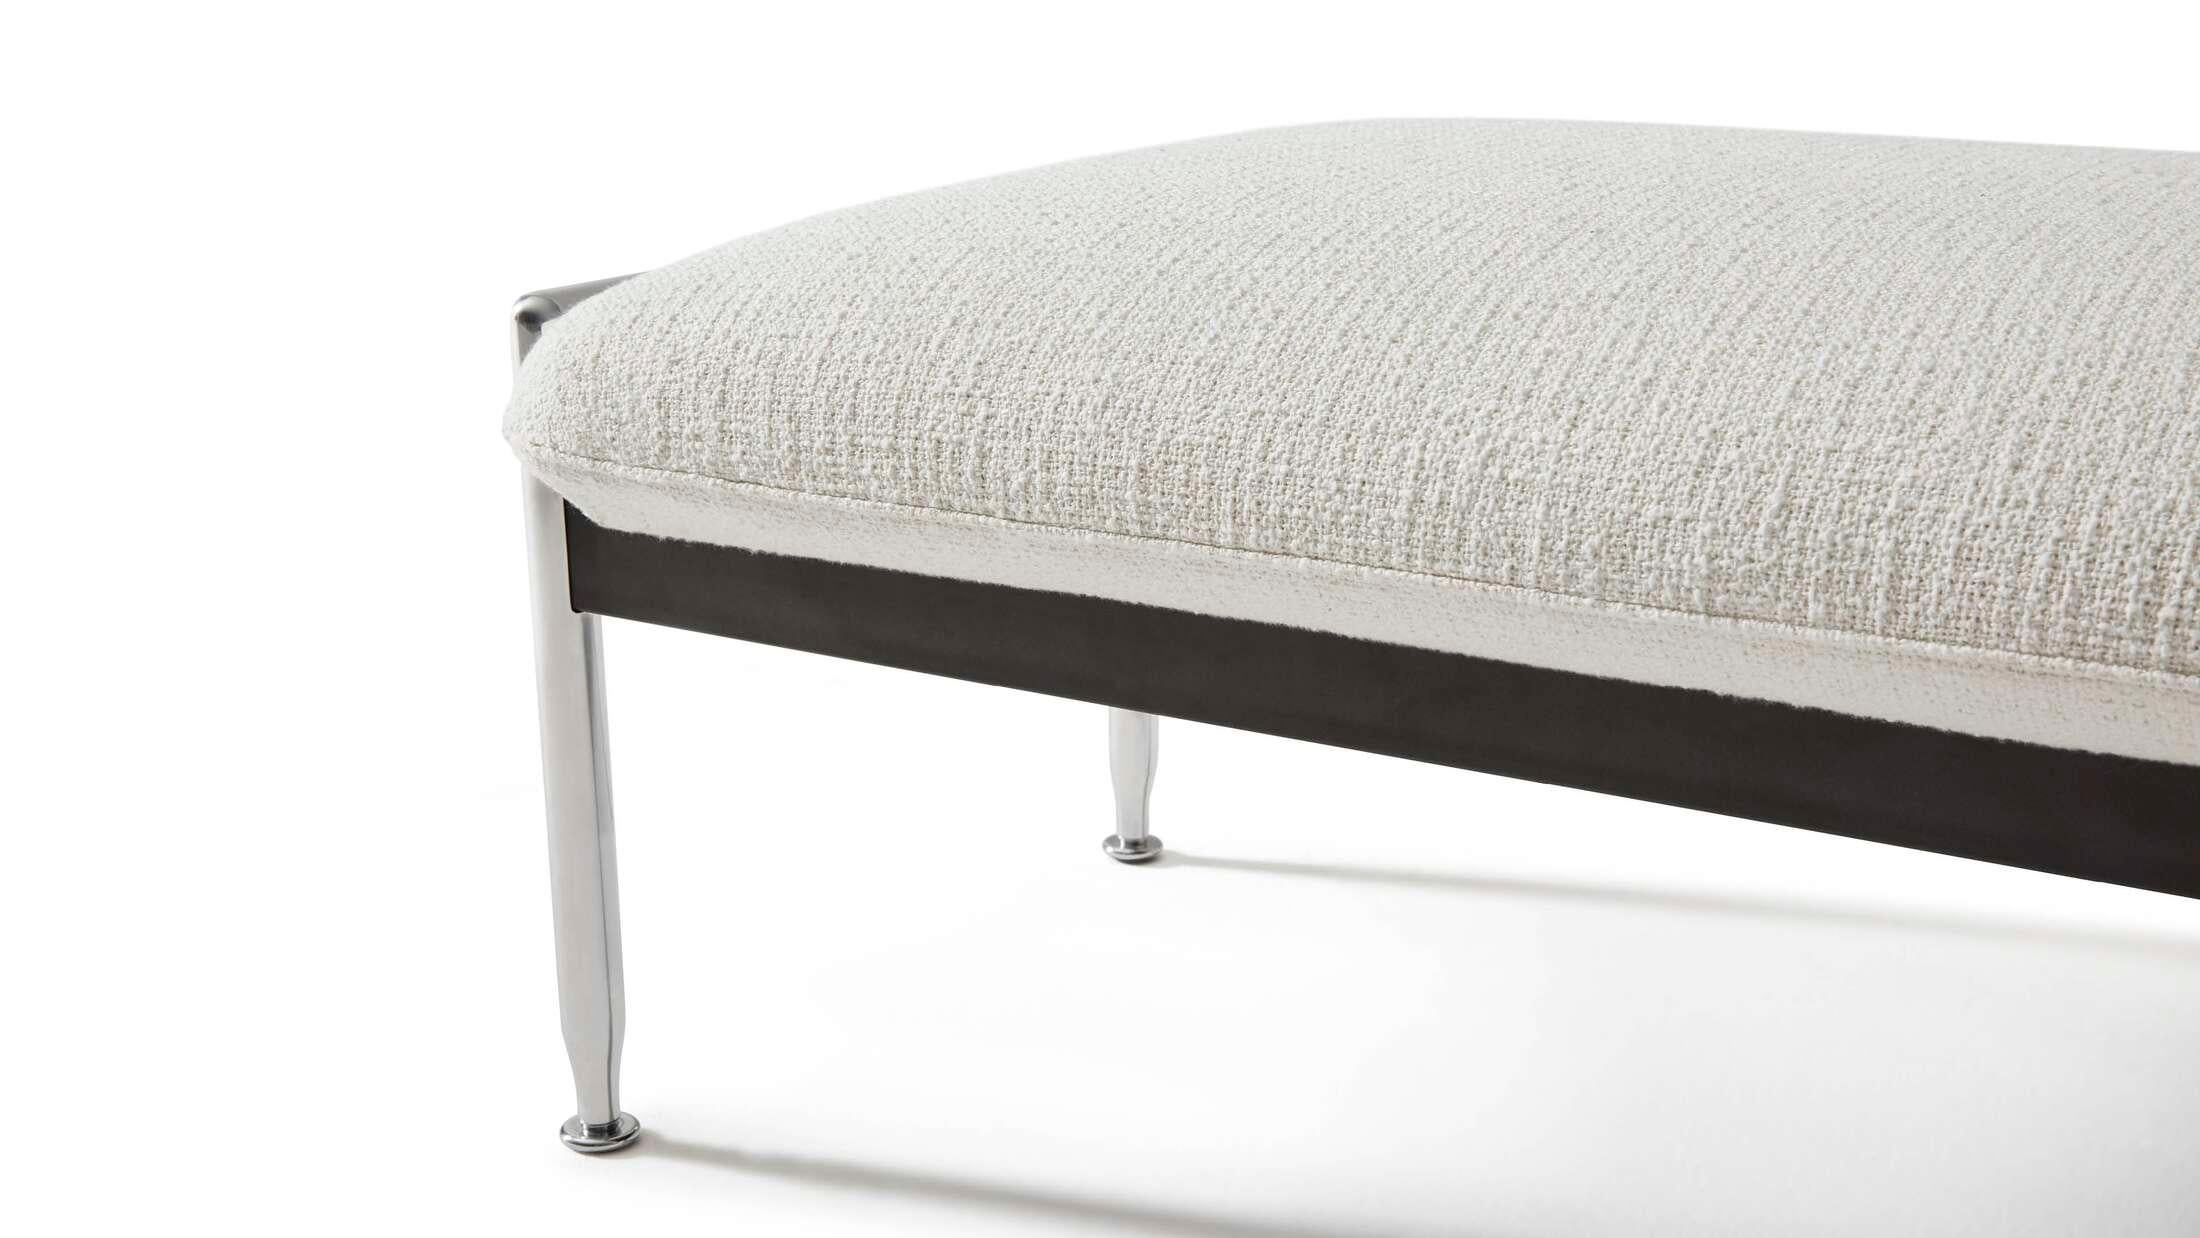 Antonio Citterio Esosoft Bench by Cassina, Italy - 2022. Prices vary dependent on the chosen material/color.